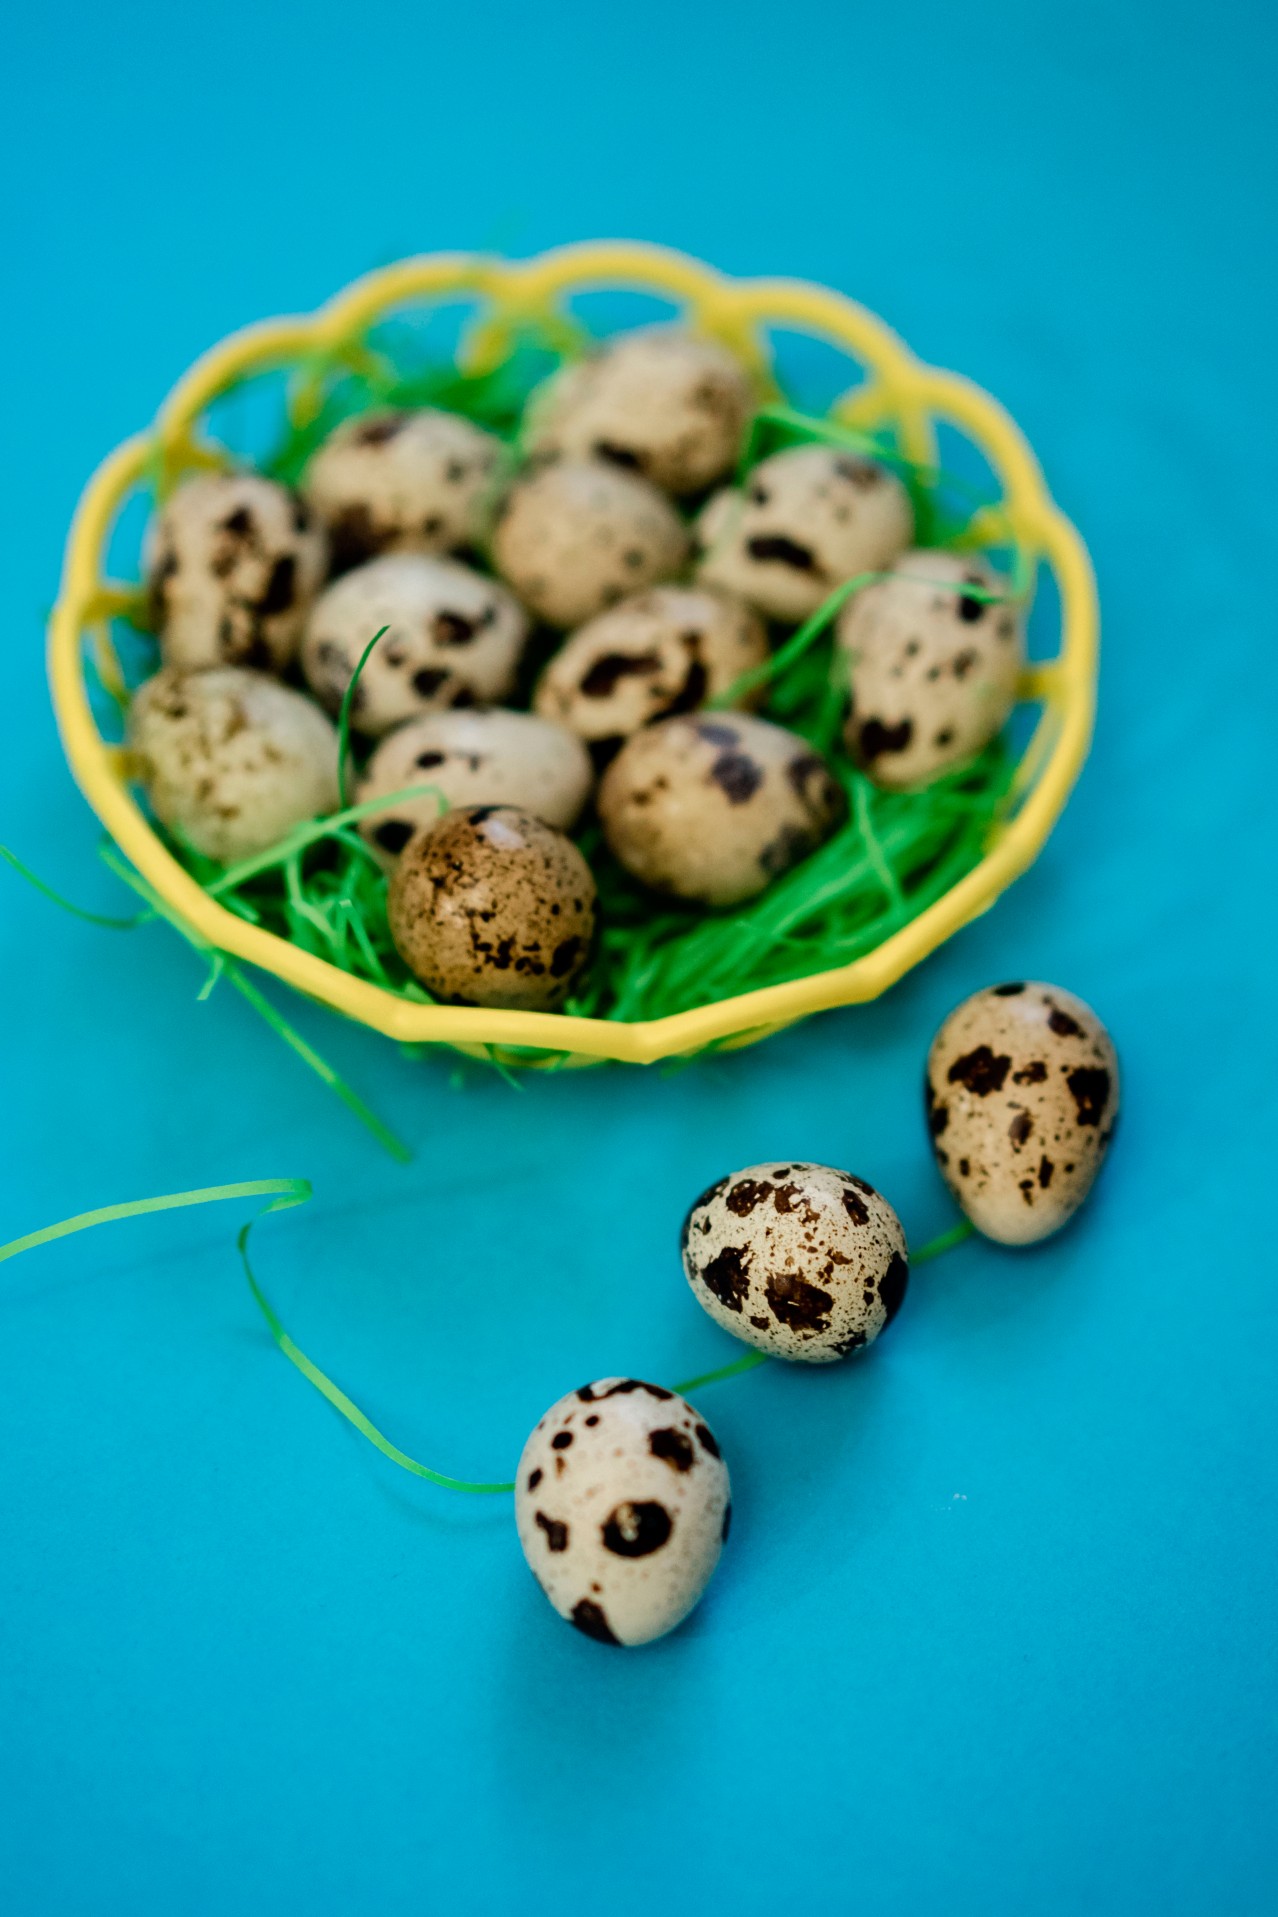 Plate with quail eggs on the blue surface